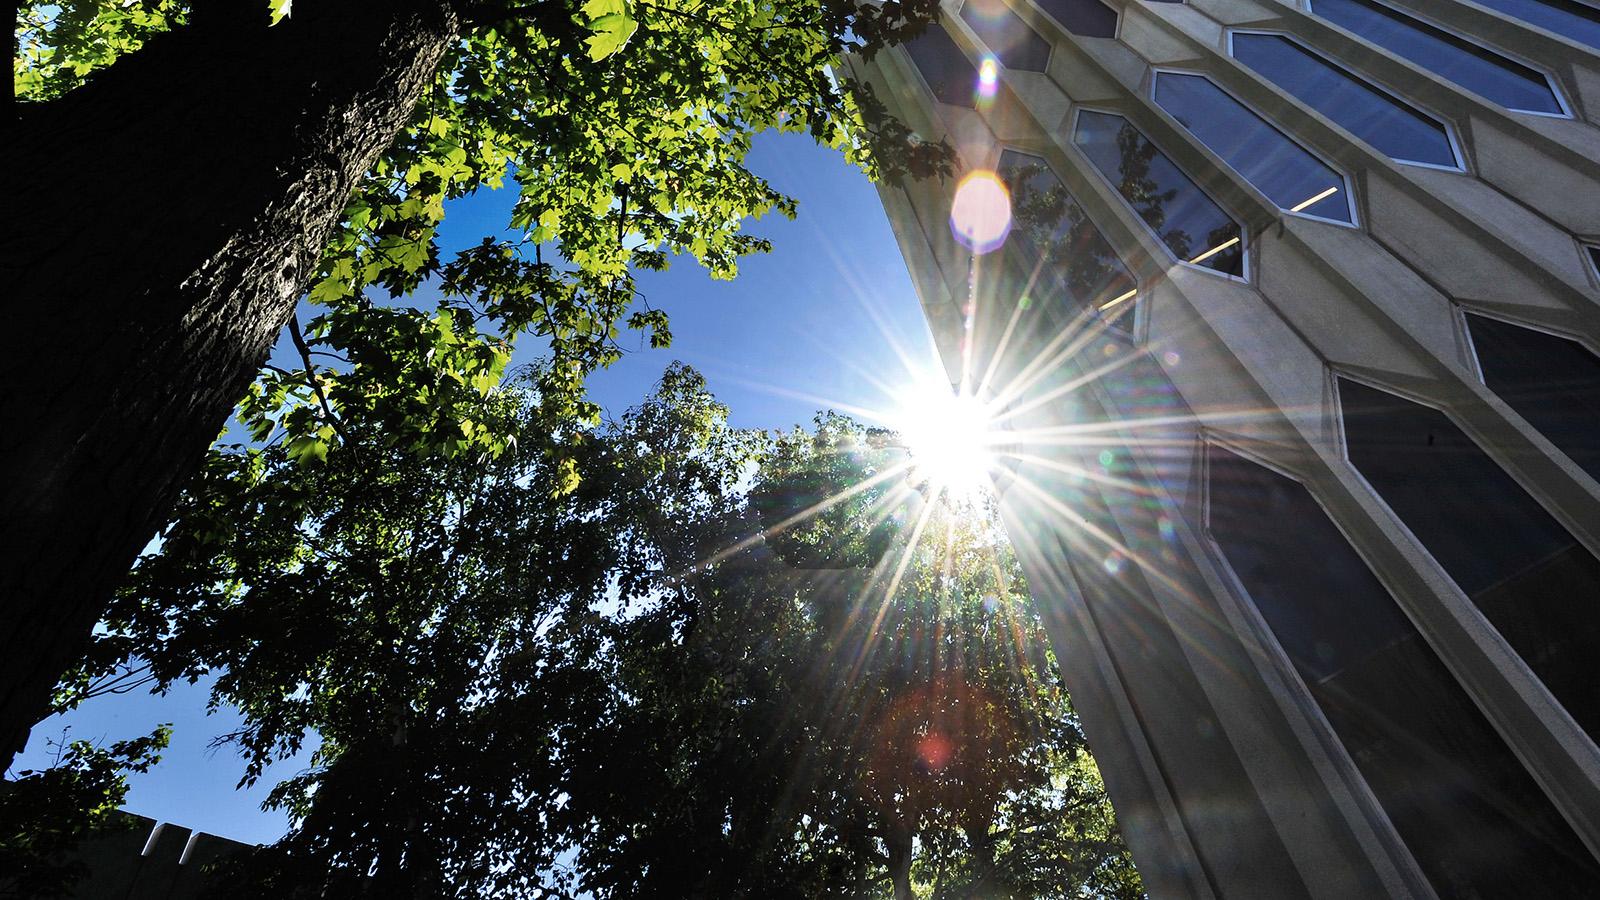 Looking up at the sky; the bright sun is partially blocked by Bibbins Hall and a tree.